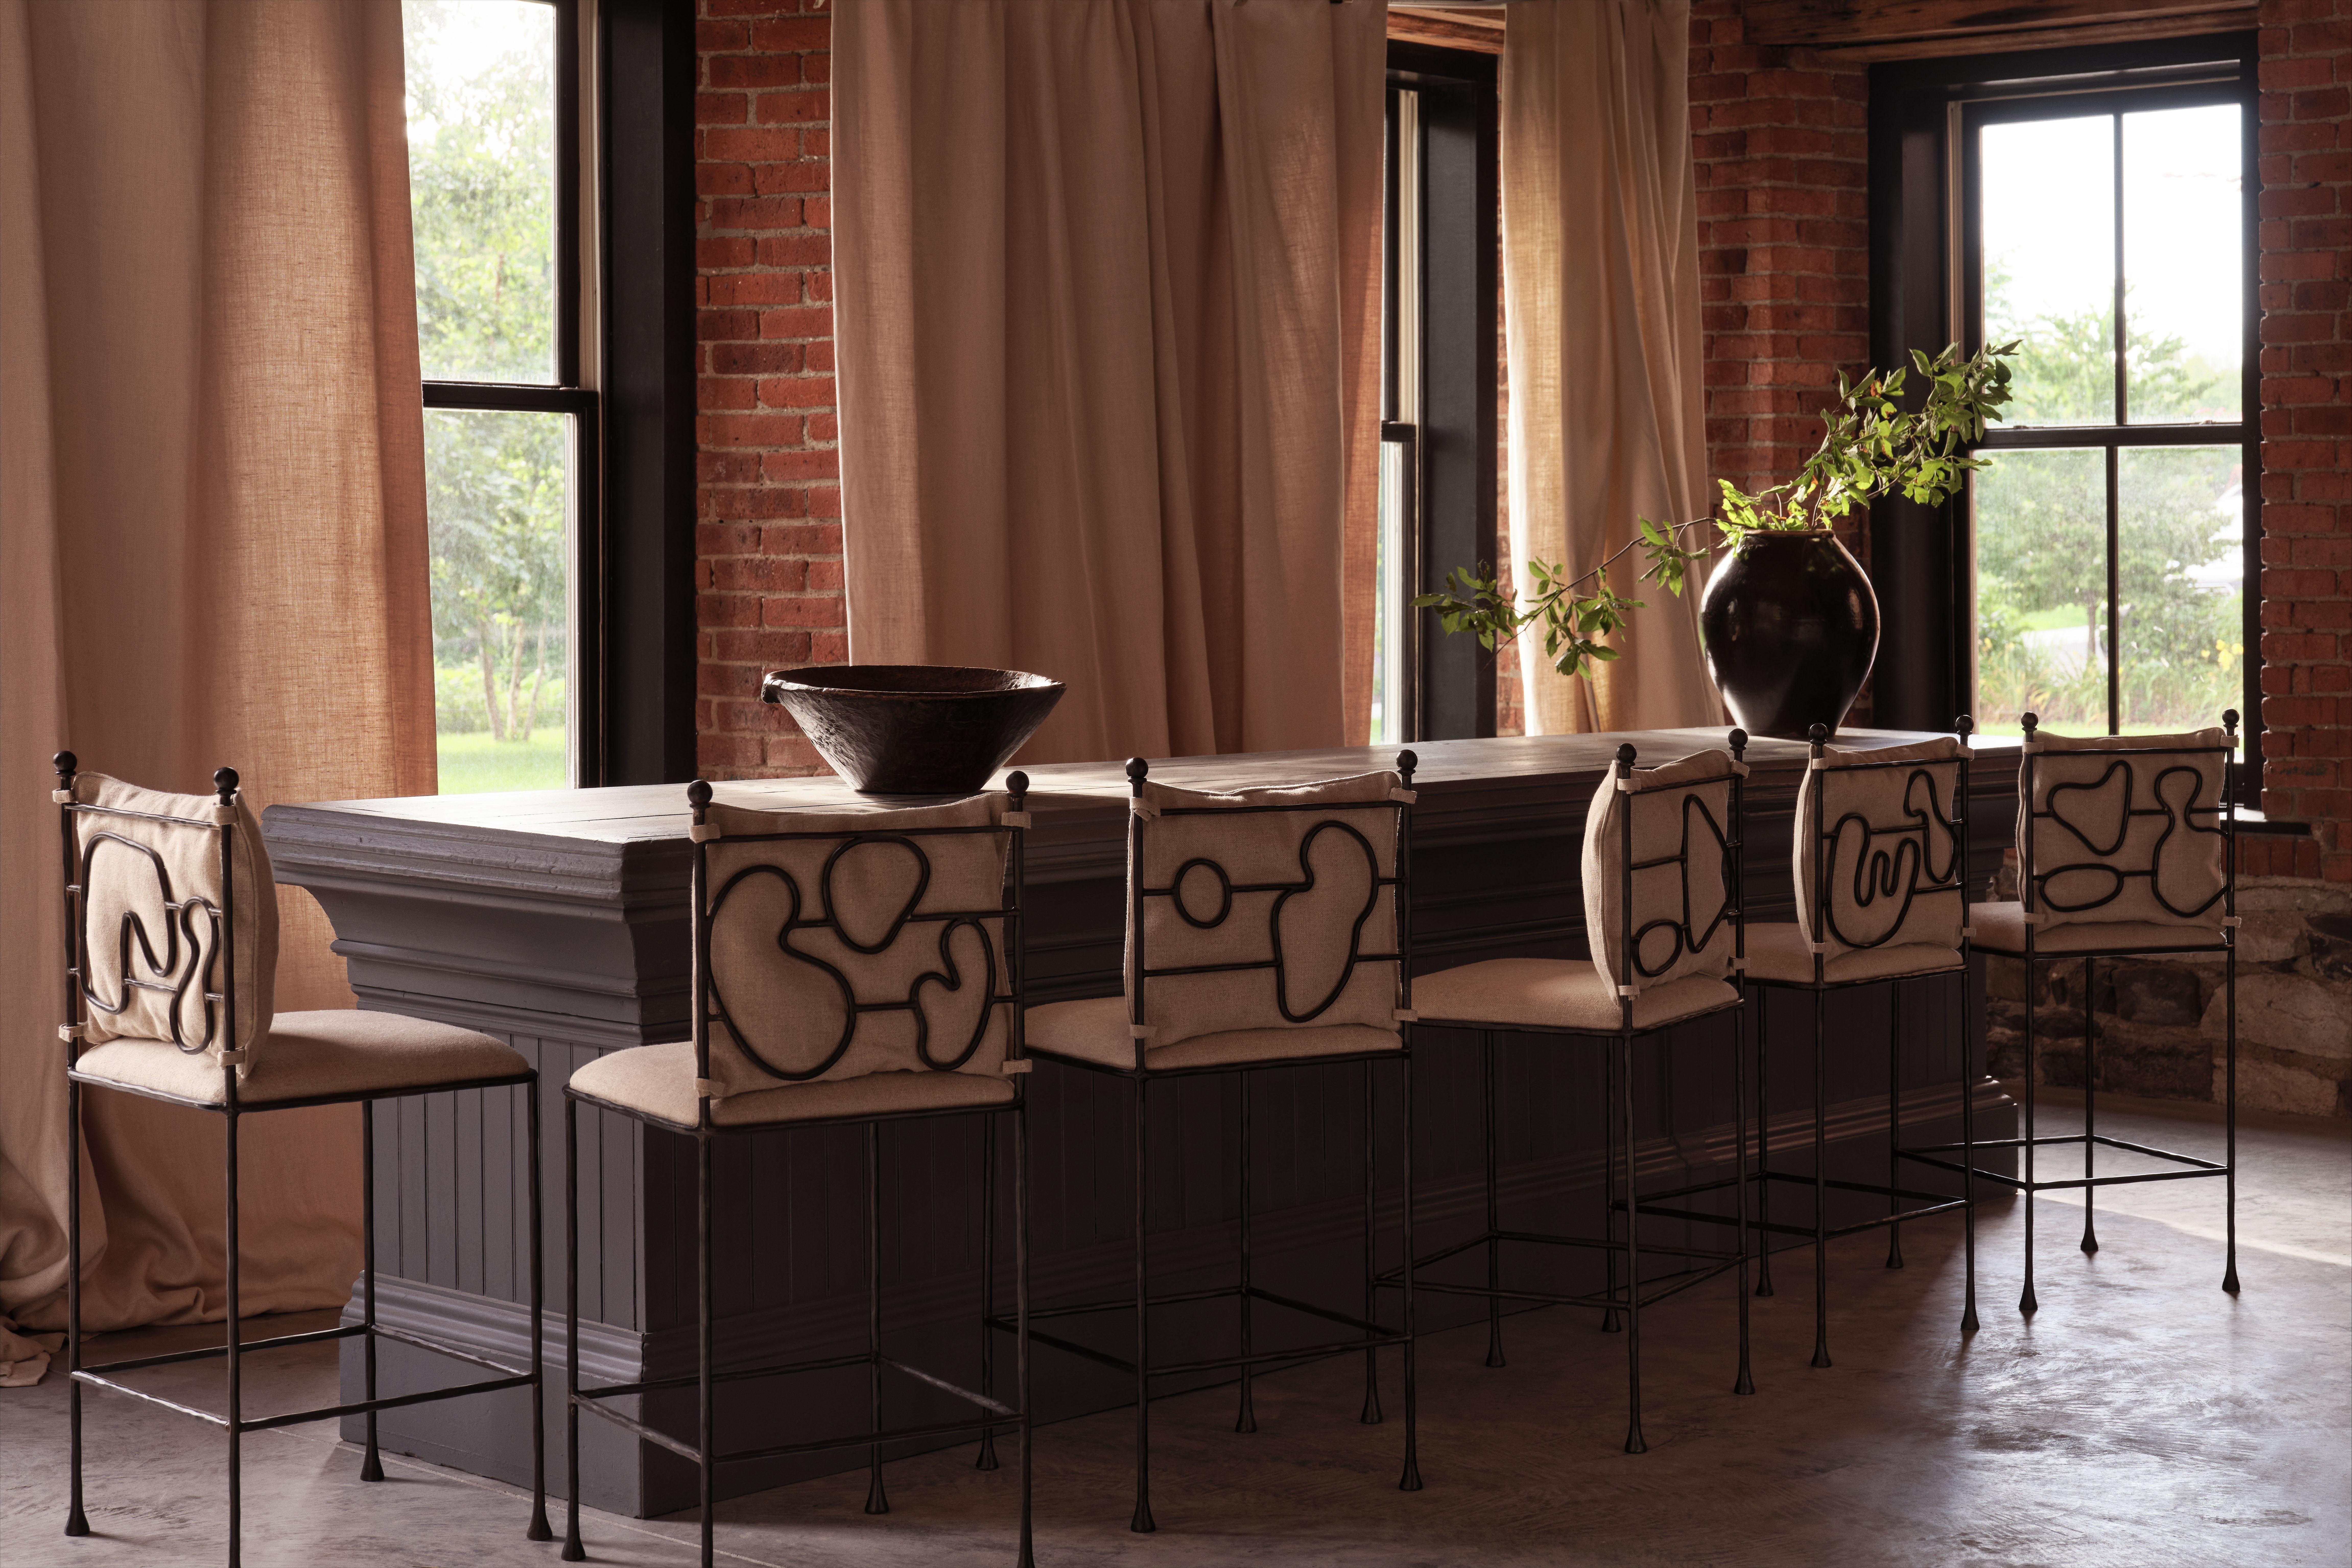 Each Wrought Iron Counter Stool has a unique composition wrought into the backrest. There are six shapes to choose from each with an upholstered seat cushion and removable back cushion to complete the design.

Materials: Wrought Iron +